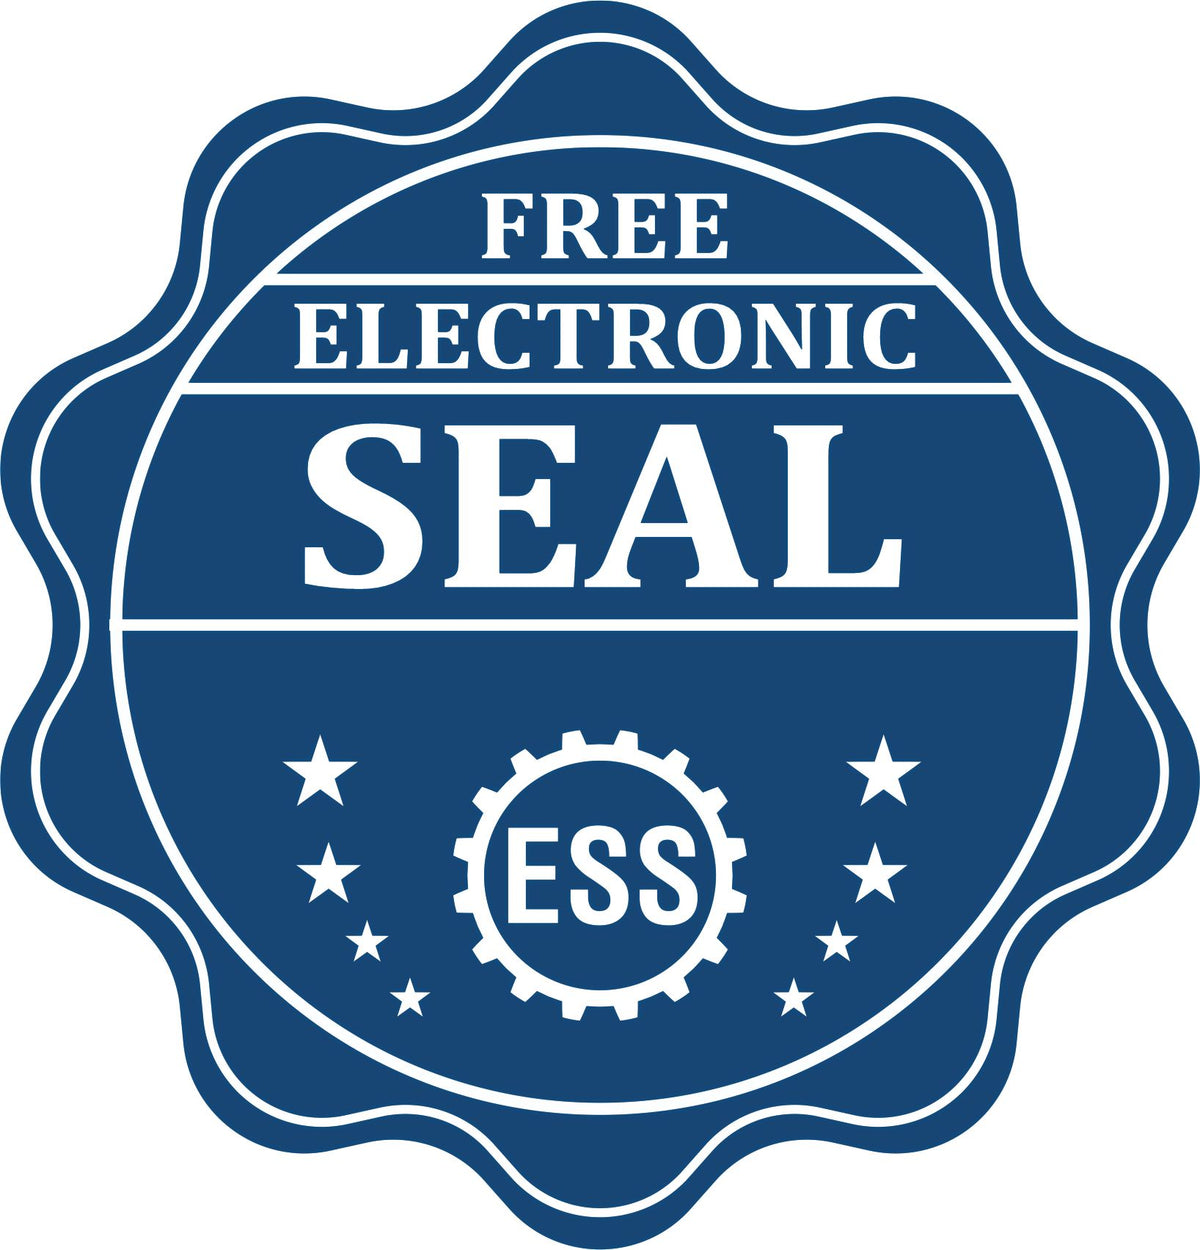 A badge showing a free electronic seal for the Super Slim Alaska Notary Public Stamp with stars and the ESS gear on the emblem.